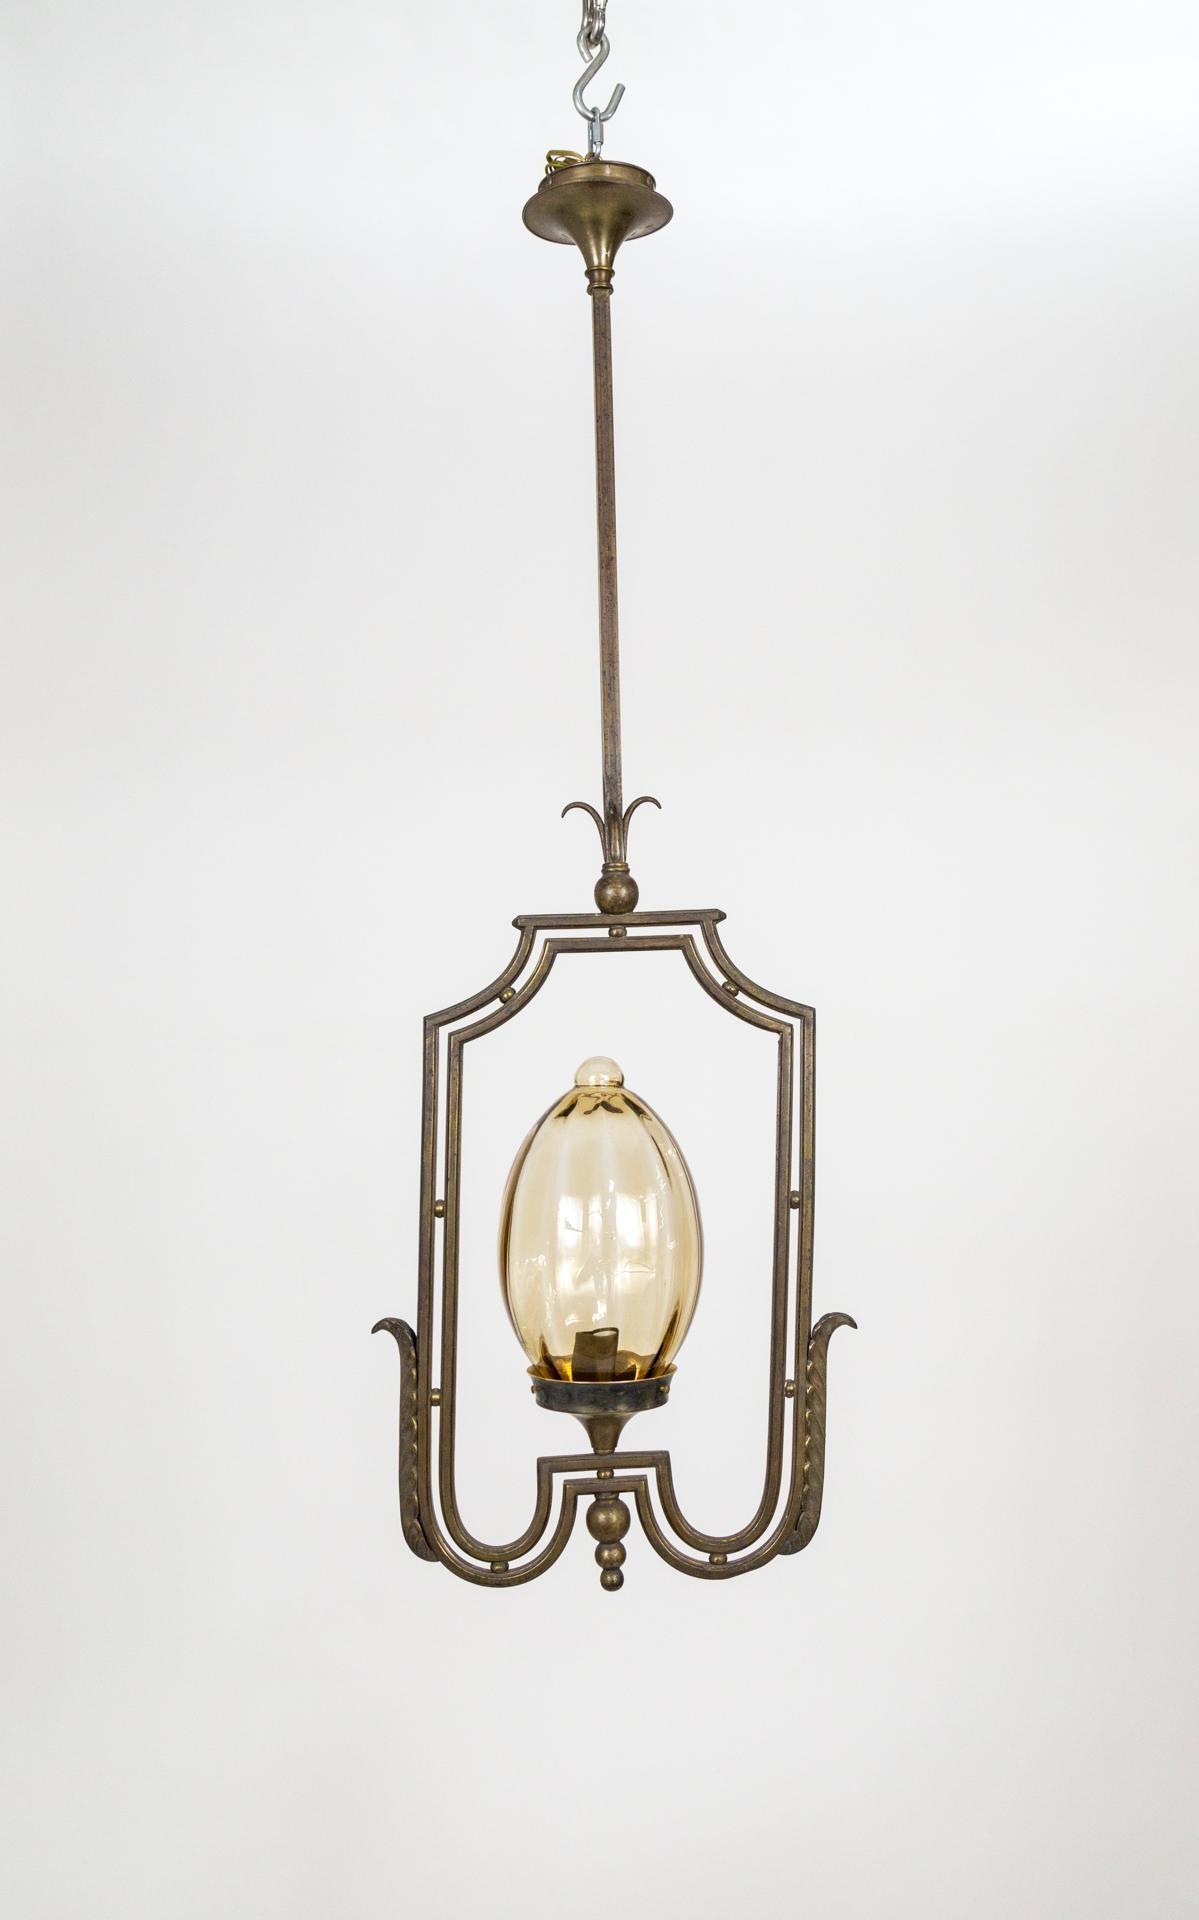 A large pendant light with a dark, patinated metal structure framing an egg-shaped glass shade. The glass has a subtle brown tint and ribbed texture. The fixture is a stylized, rectangular shape, decorated with sphere and leaf accents and a long